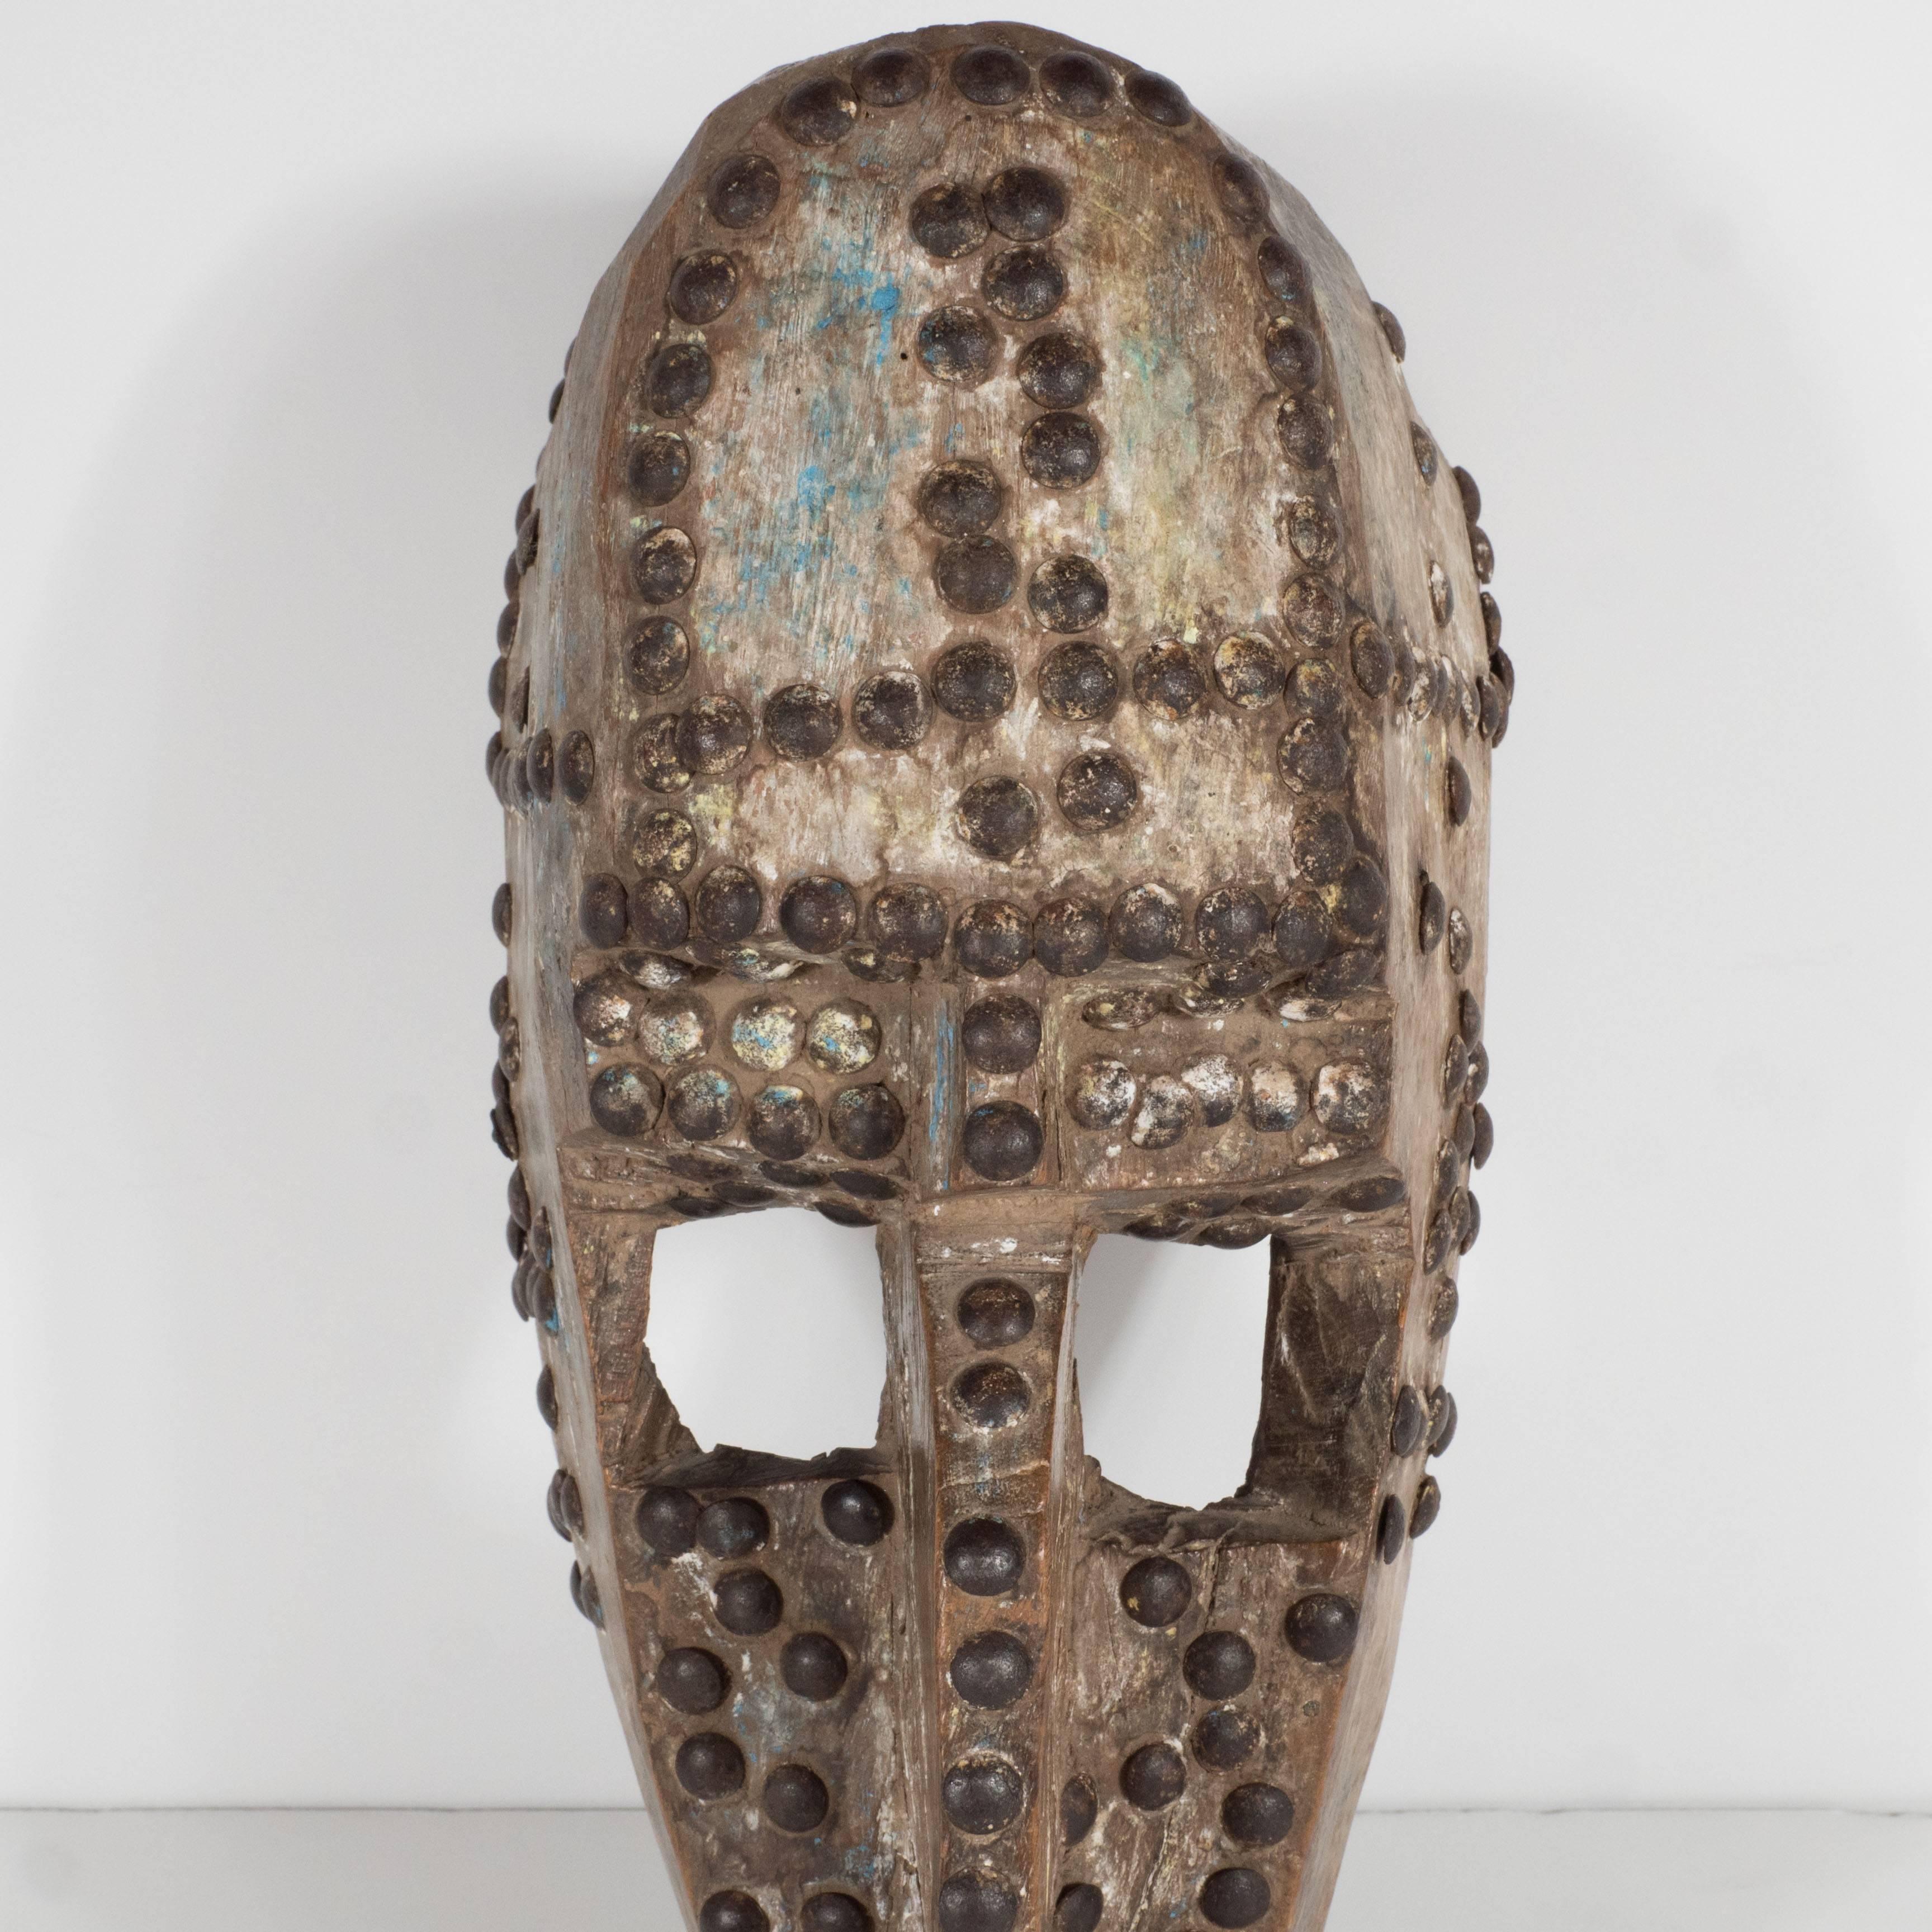 19th Century African Marka Mask from Mali Authenticated by Sotheby's - Sculpture by Unknown